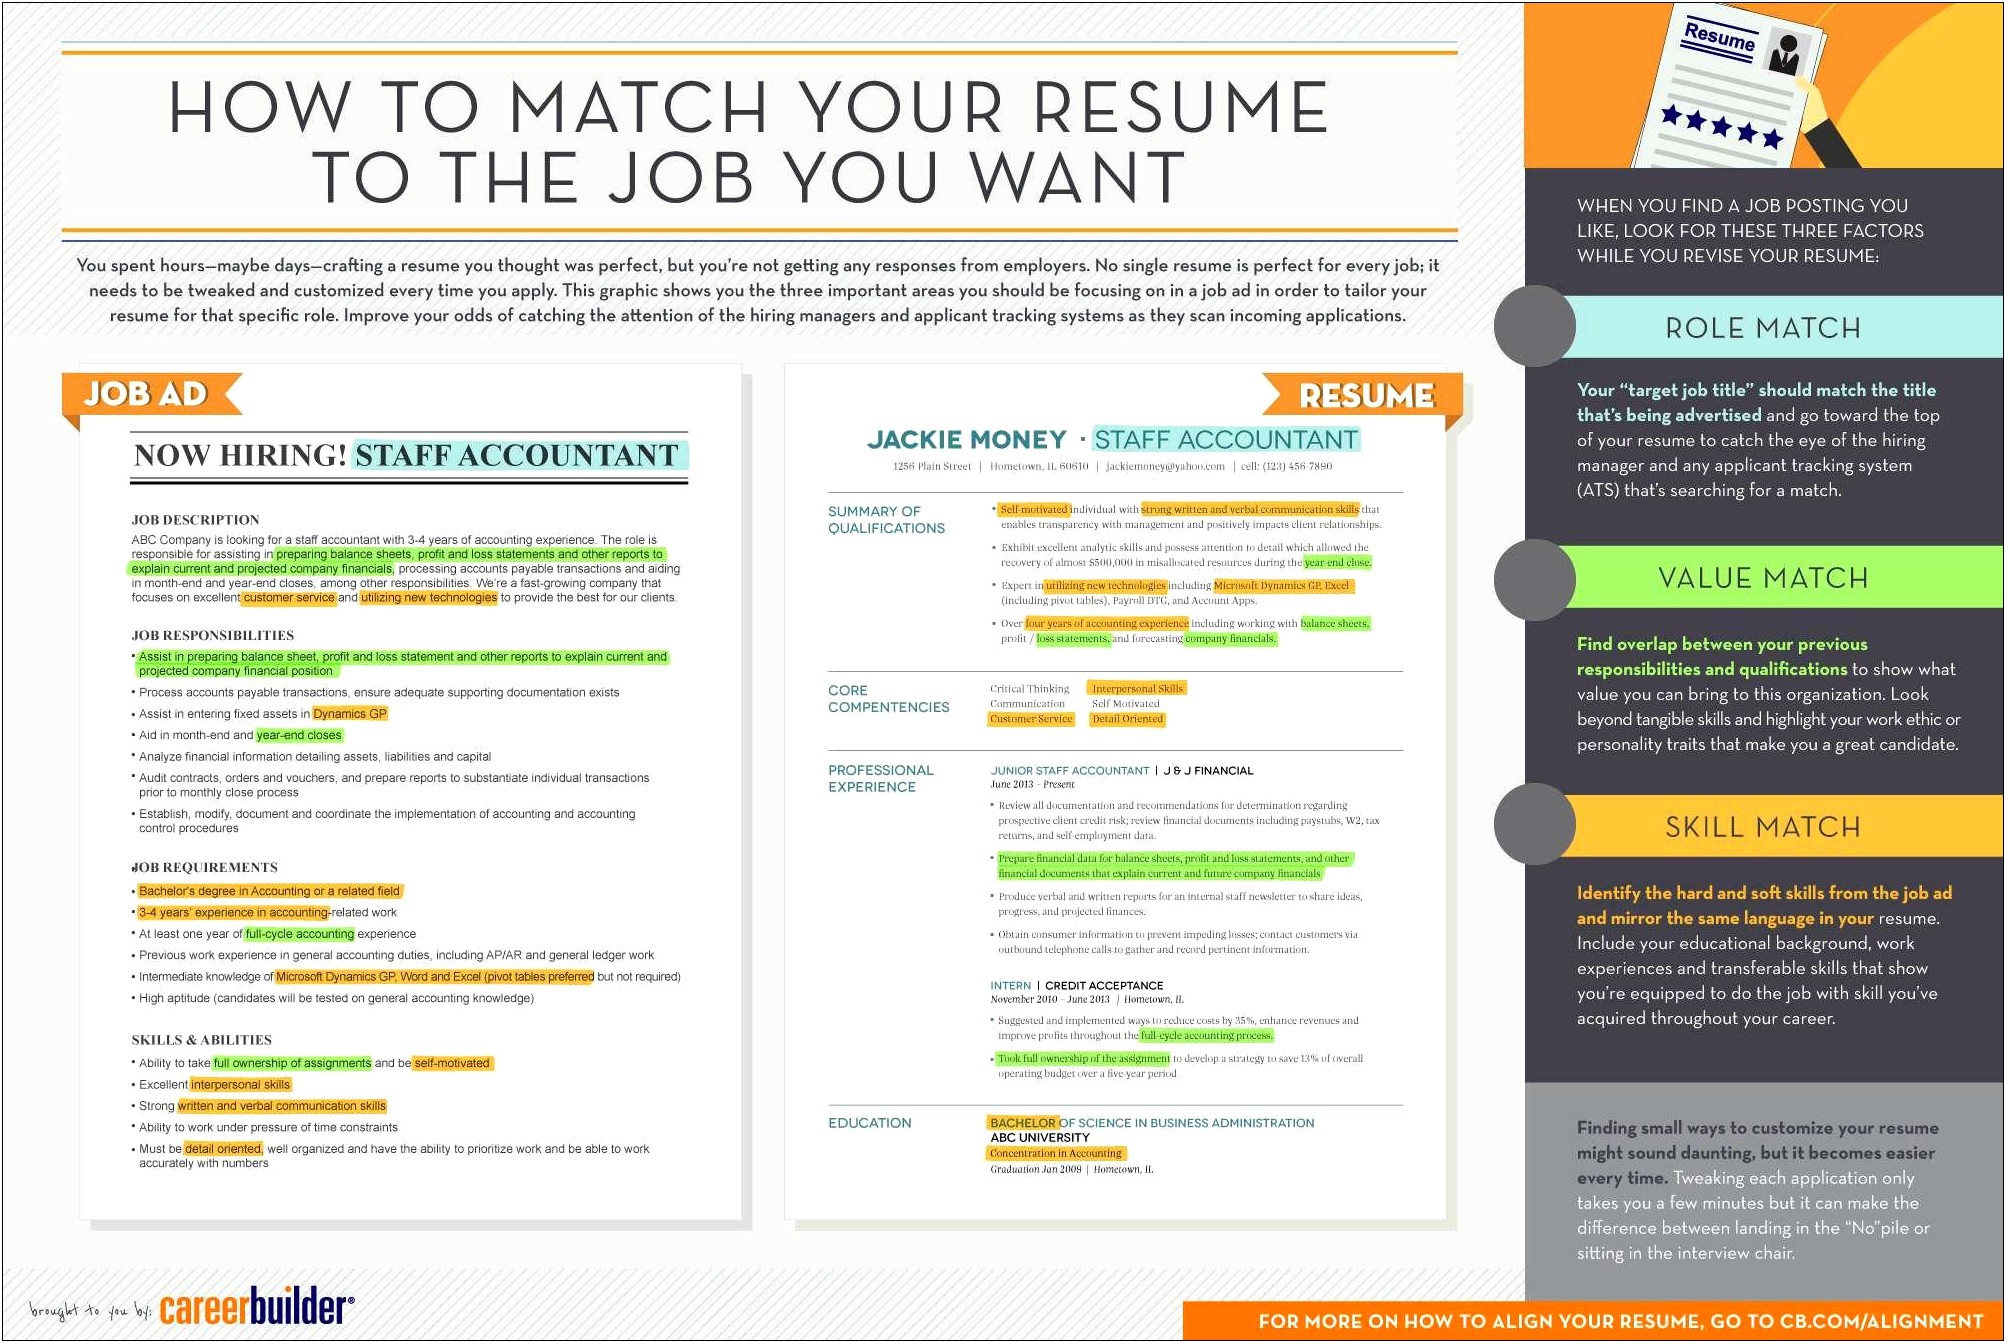 Listing A Job On Your Resume